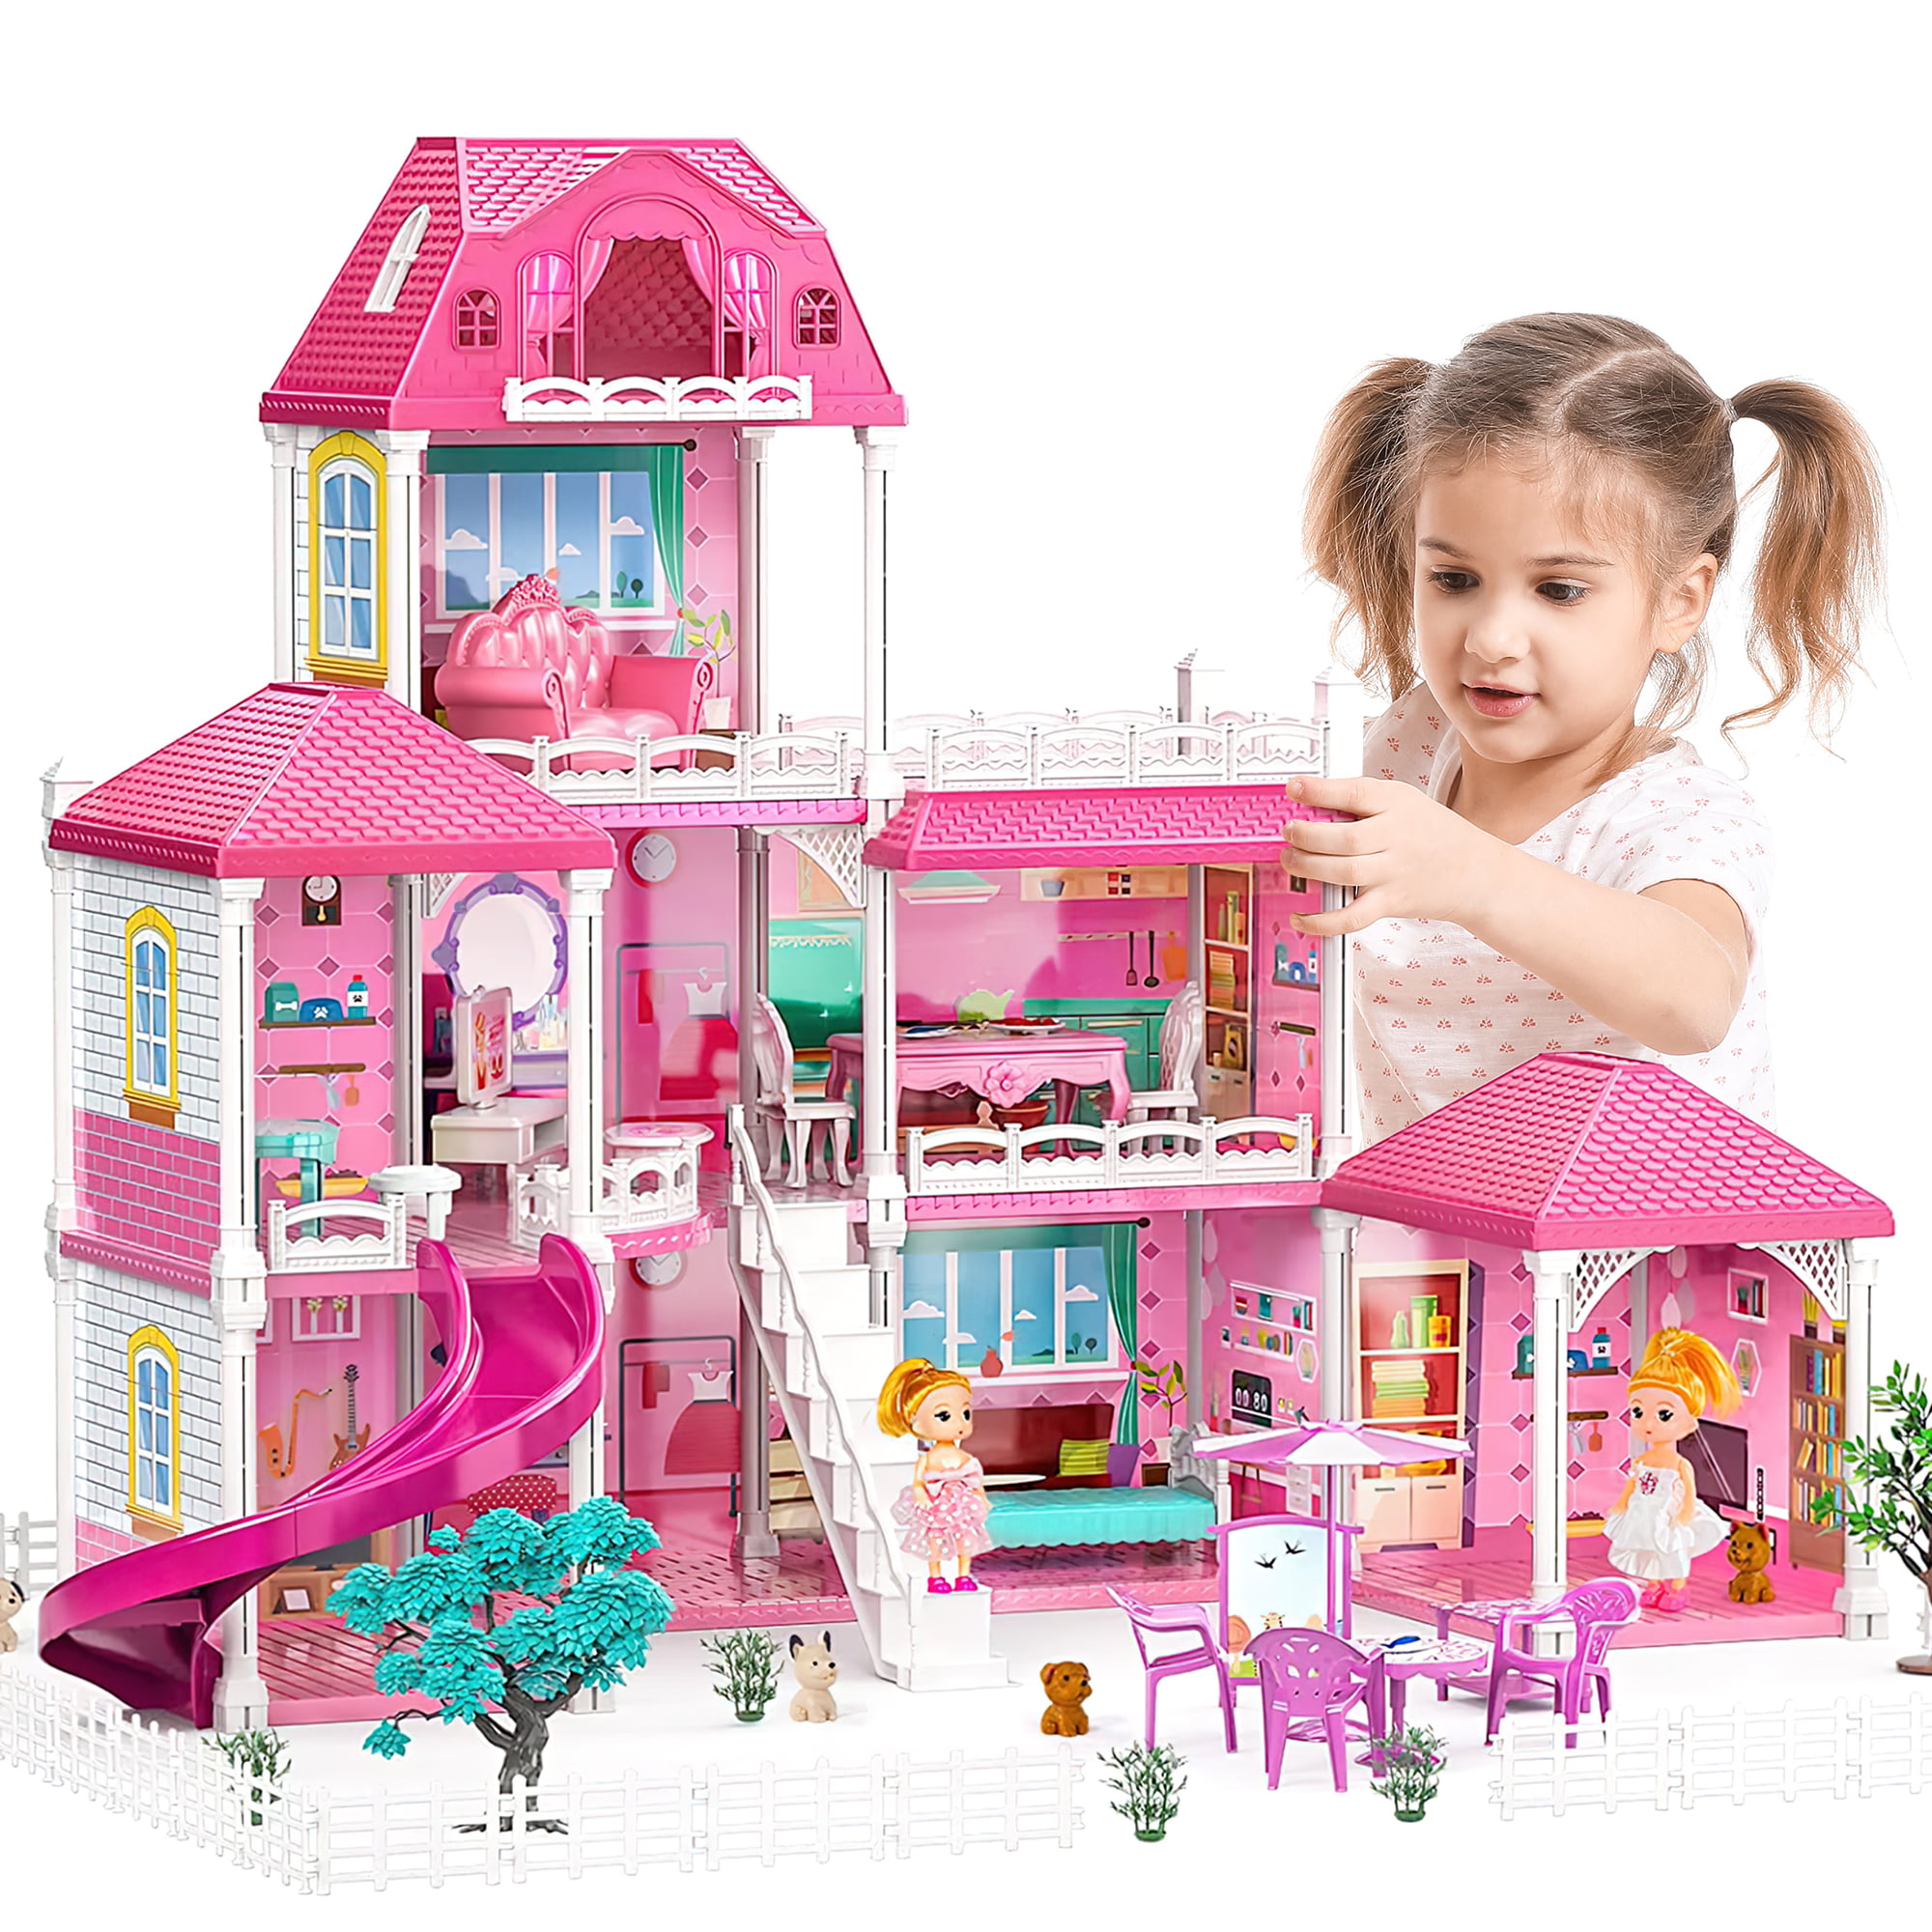 Doll House, Dream House for Girls 3 Stories 7 Rooms Dollhouses with 3 Dolls  Toy Figures, Swim Pool, Slide, Furniture and Accessories, Pretend